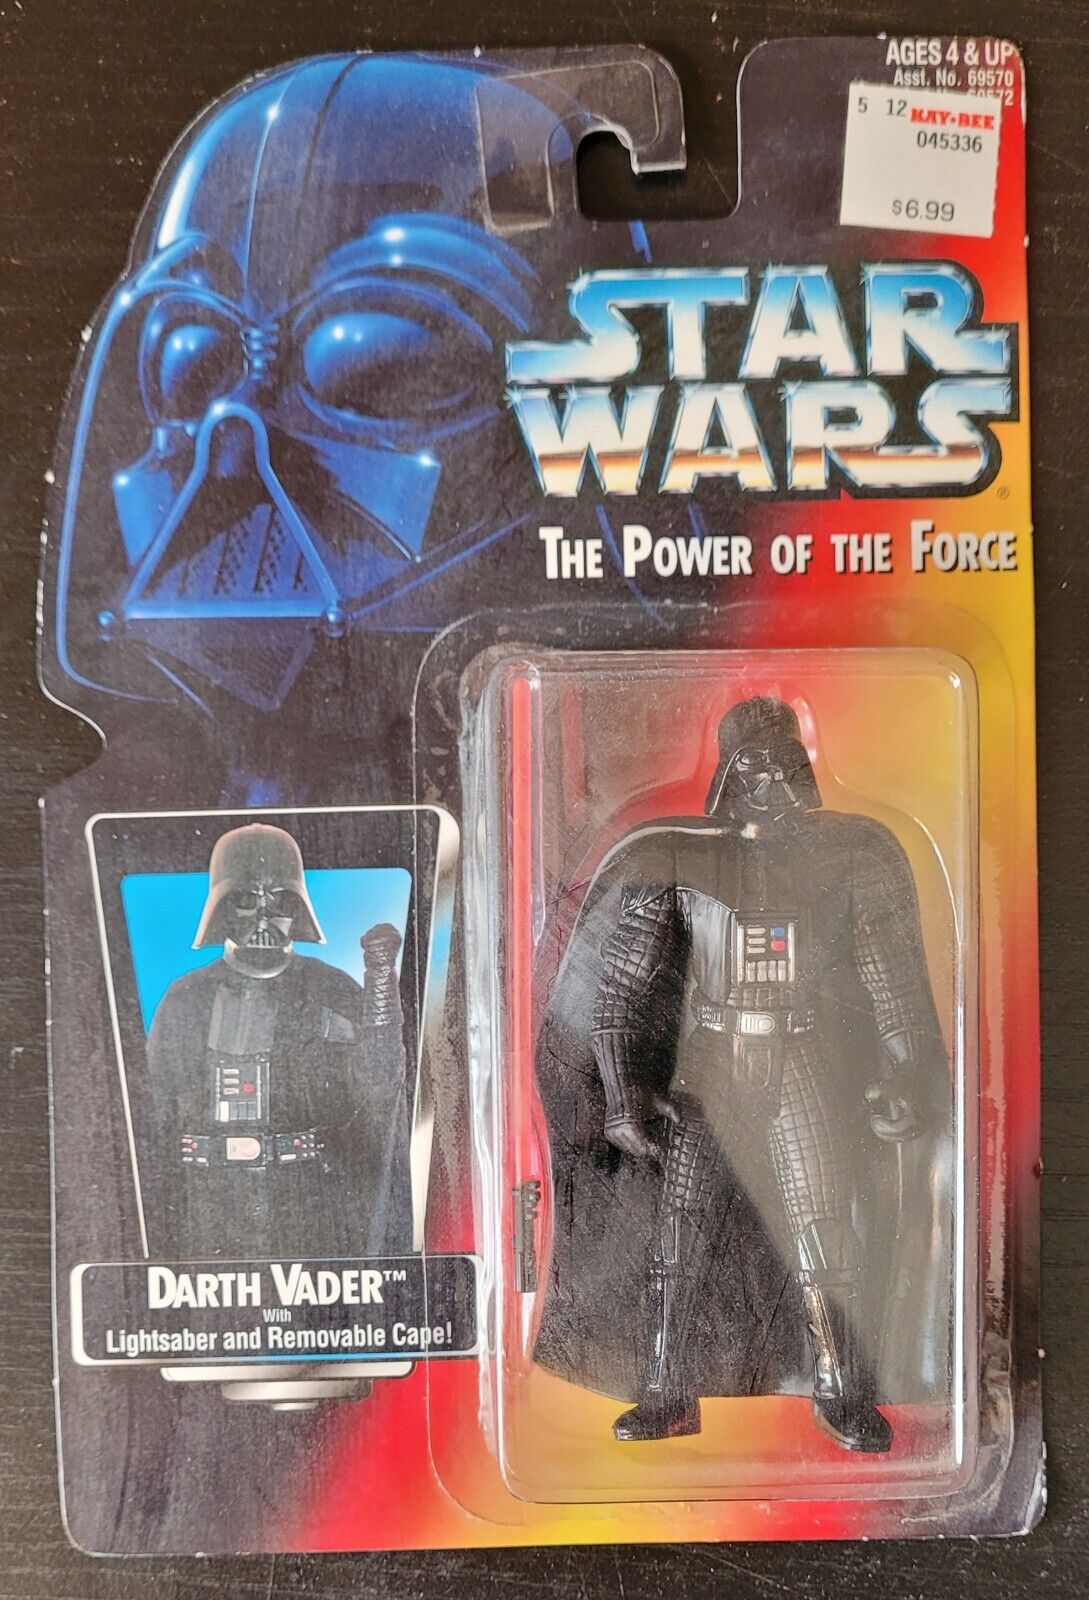 1995 KENNER STAR WARS POWER OF THE FORCE DARTH VADER ACTION FIGURE - NEW ON CARD